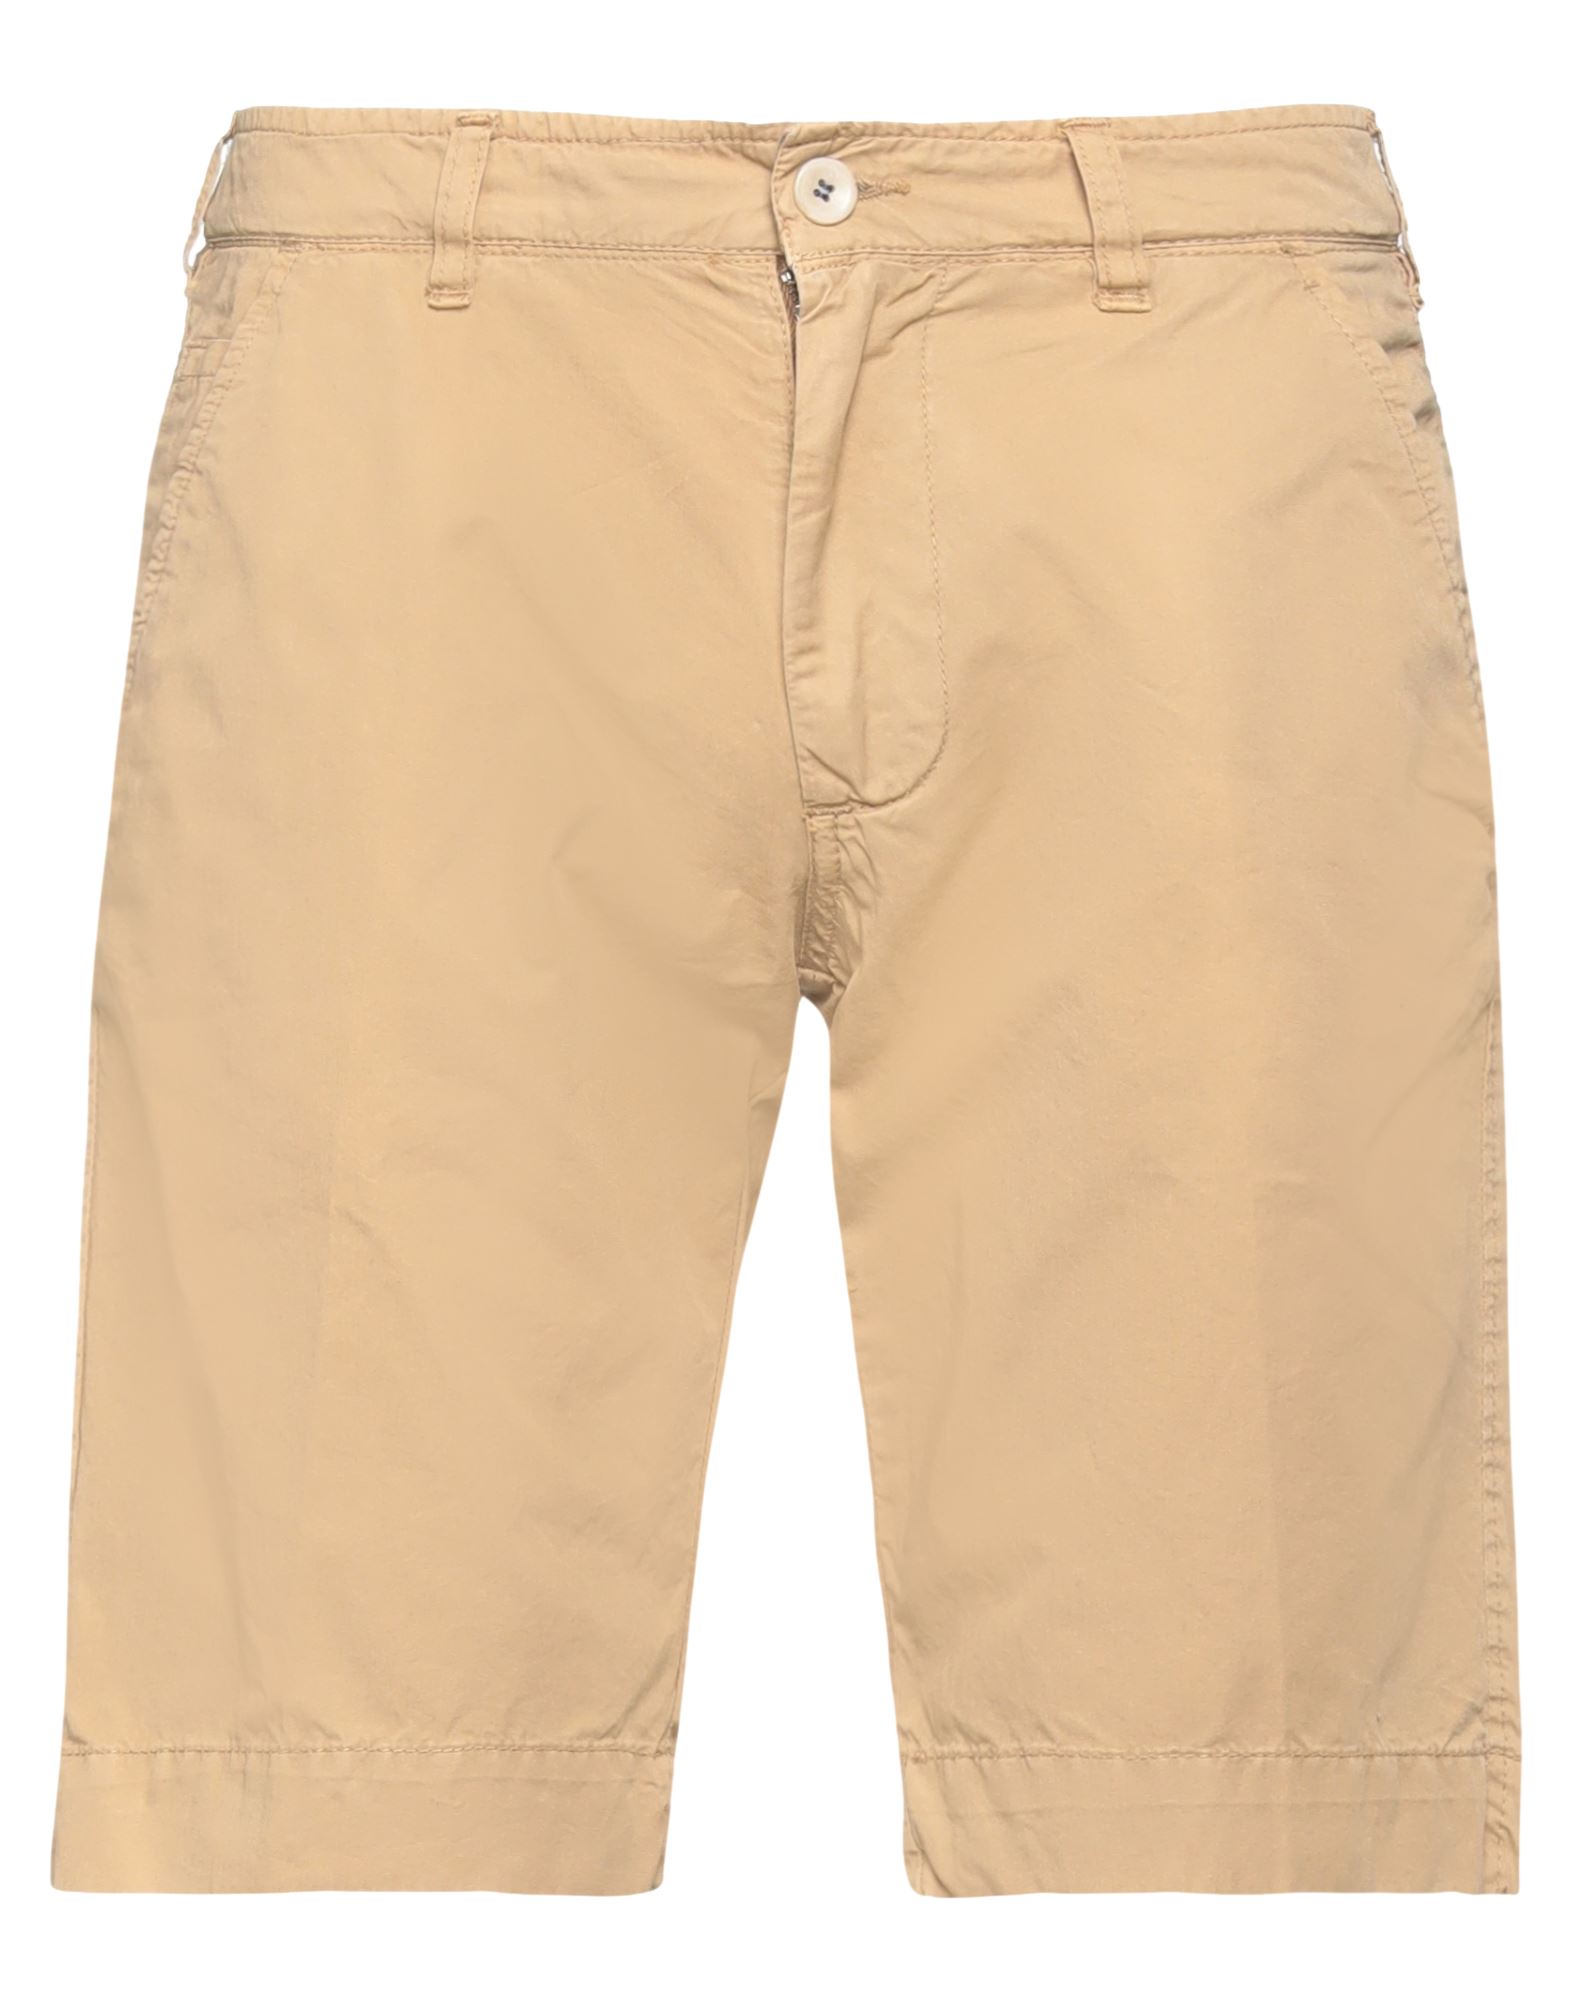 Perfection Man Shorts & Bermuda Shorts Camel Size 28 Cotton In Beige